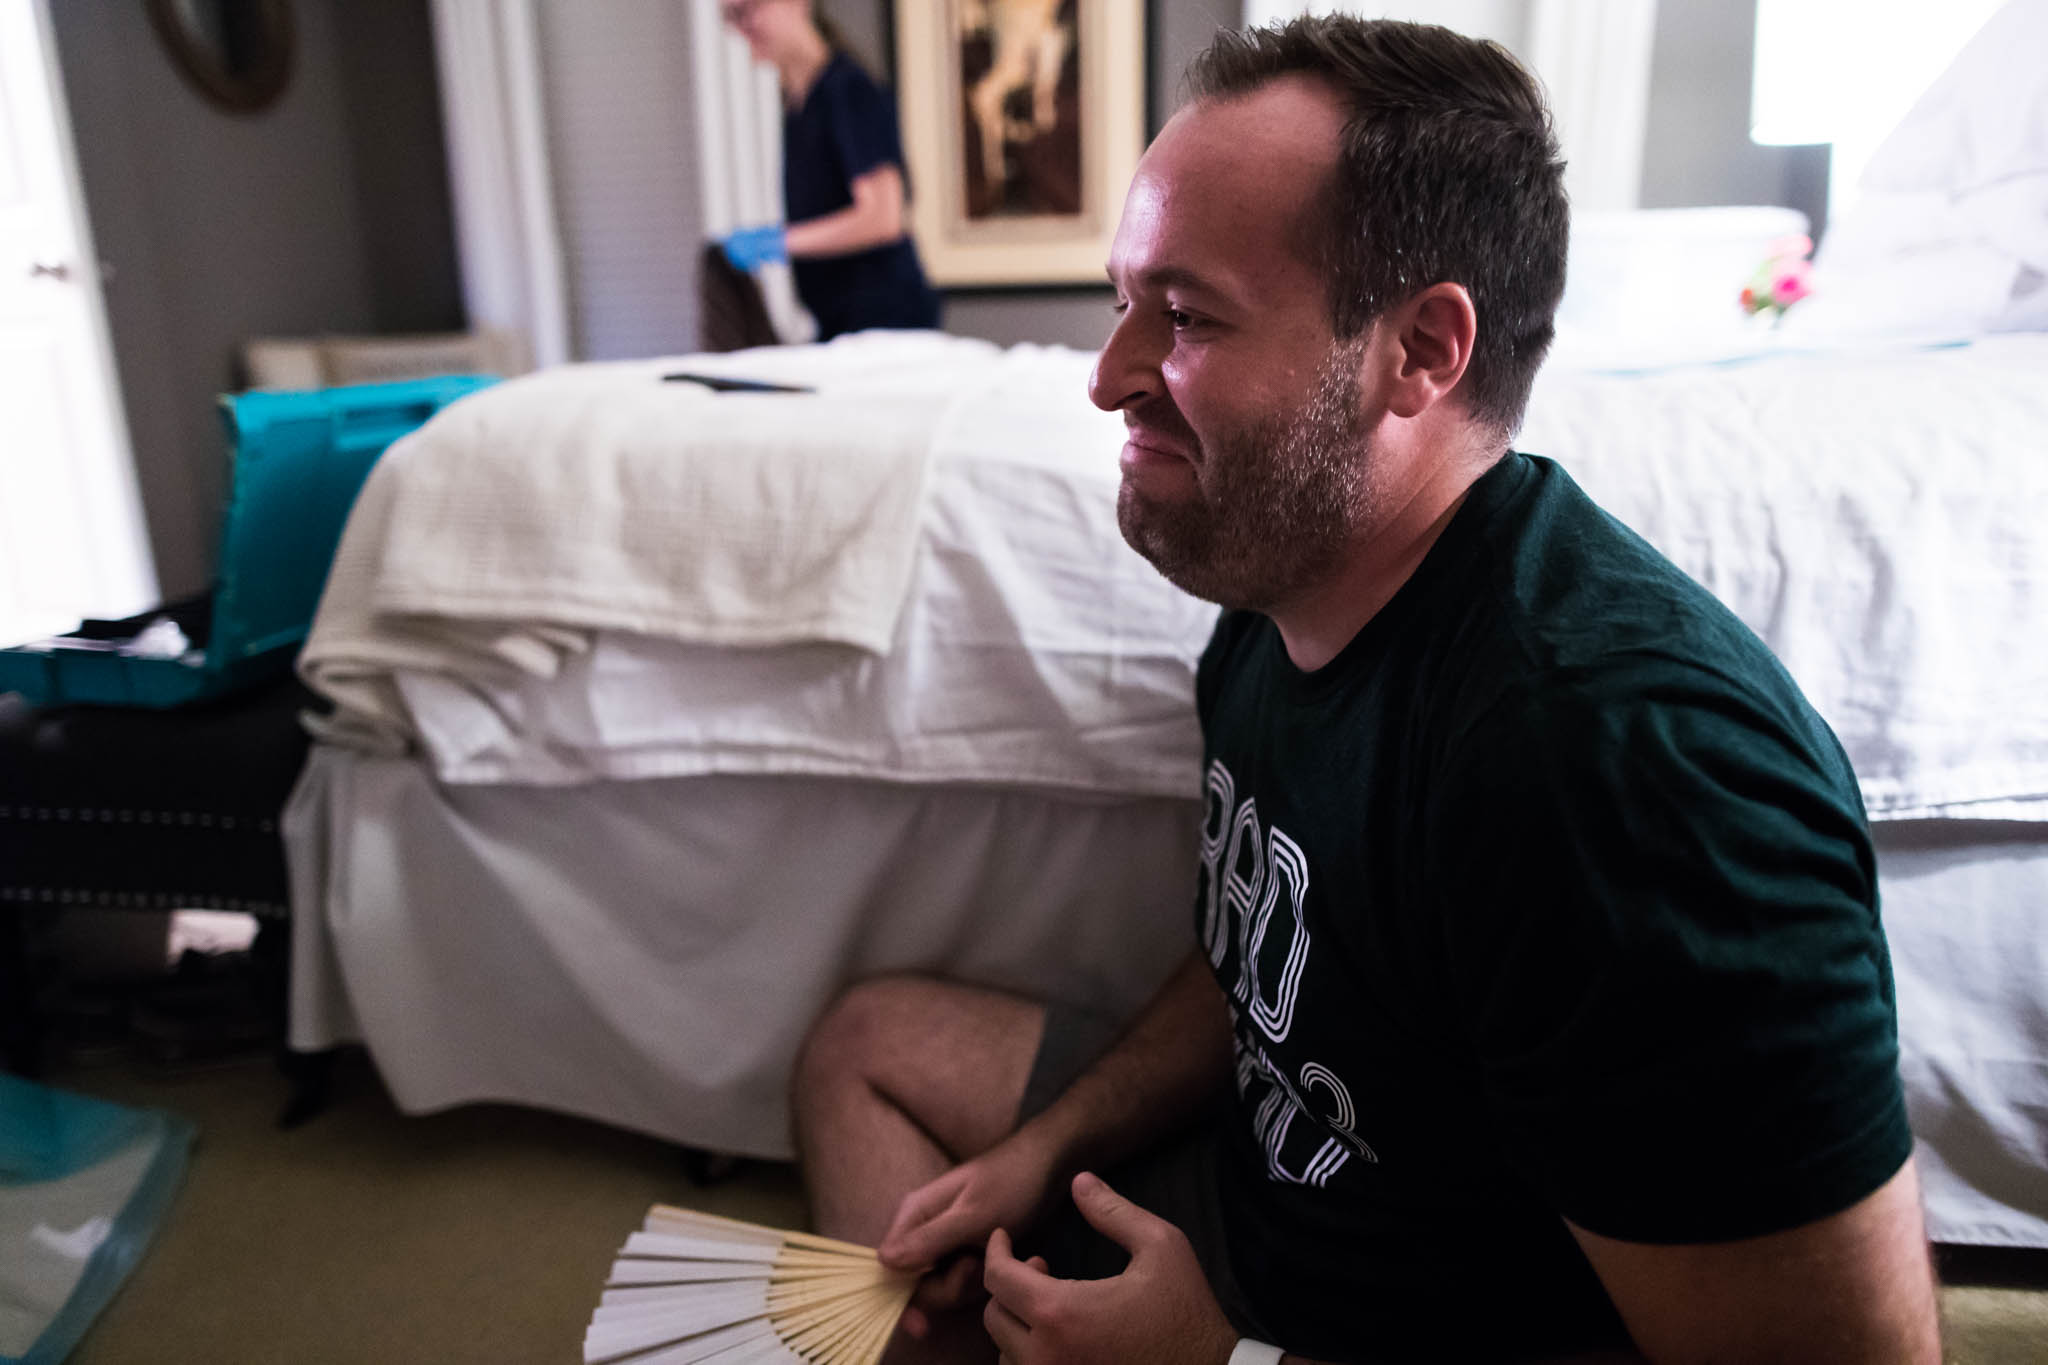 A Dallas Fort Worth Birth Photographer, Lawren Rose Photography, takes an image of a Dad seeing his baby boy for the first time during a Denton, Texas Home Birth